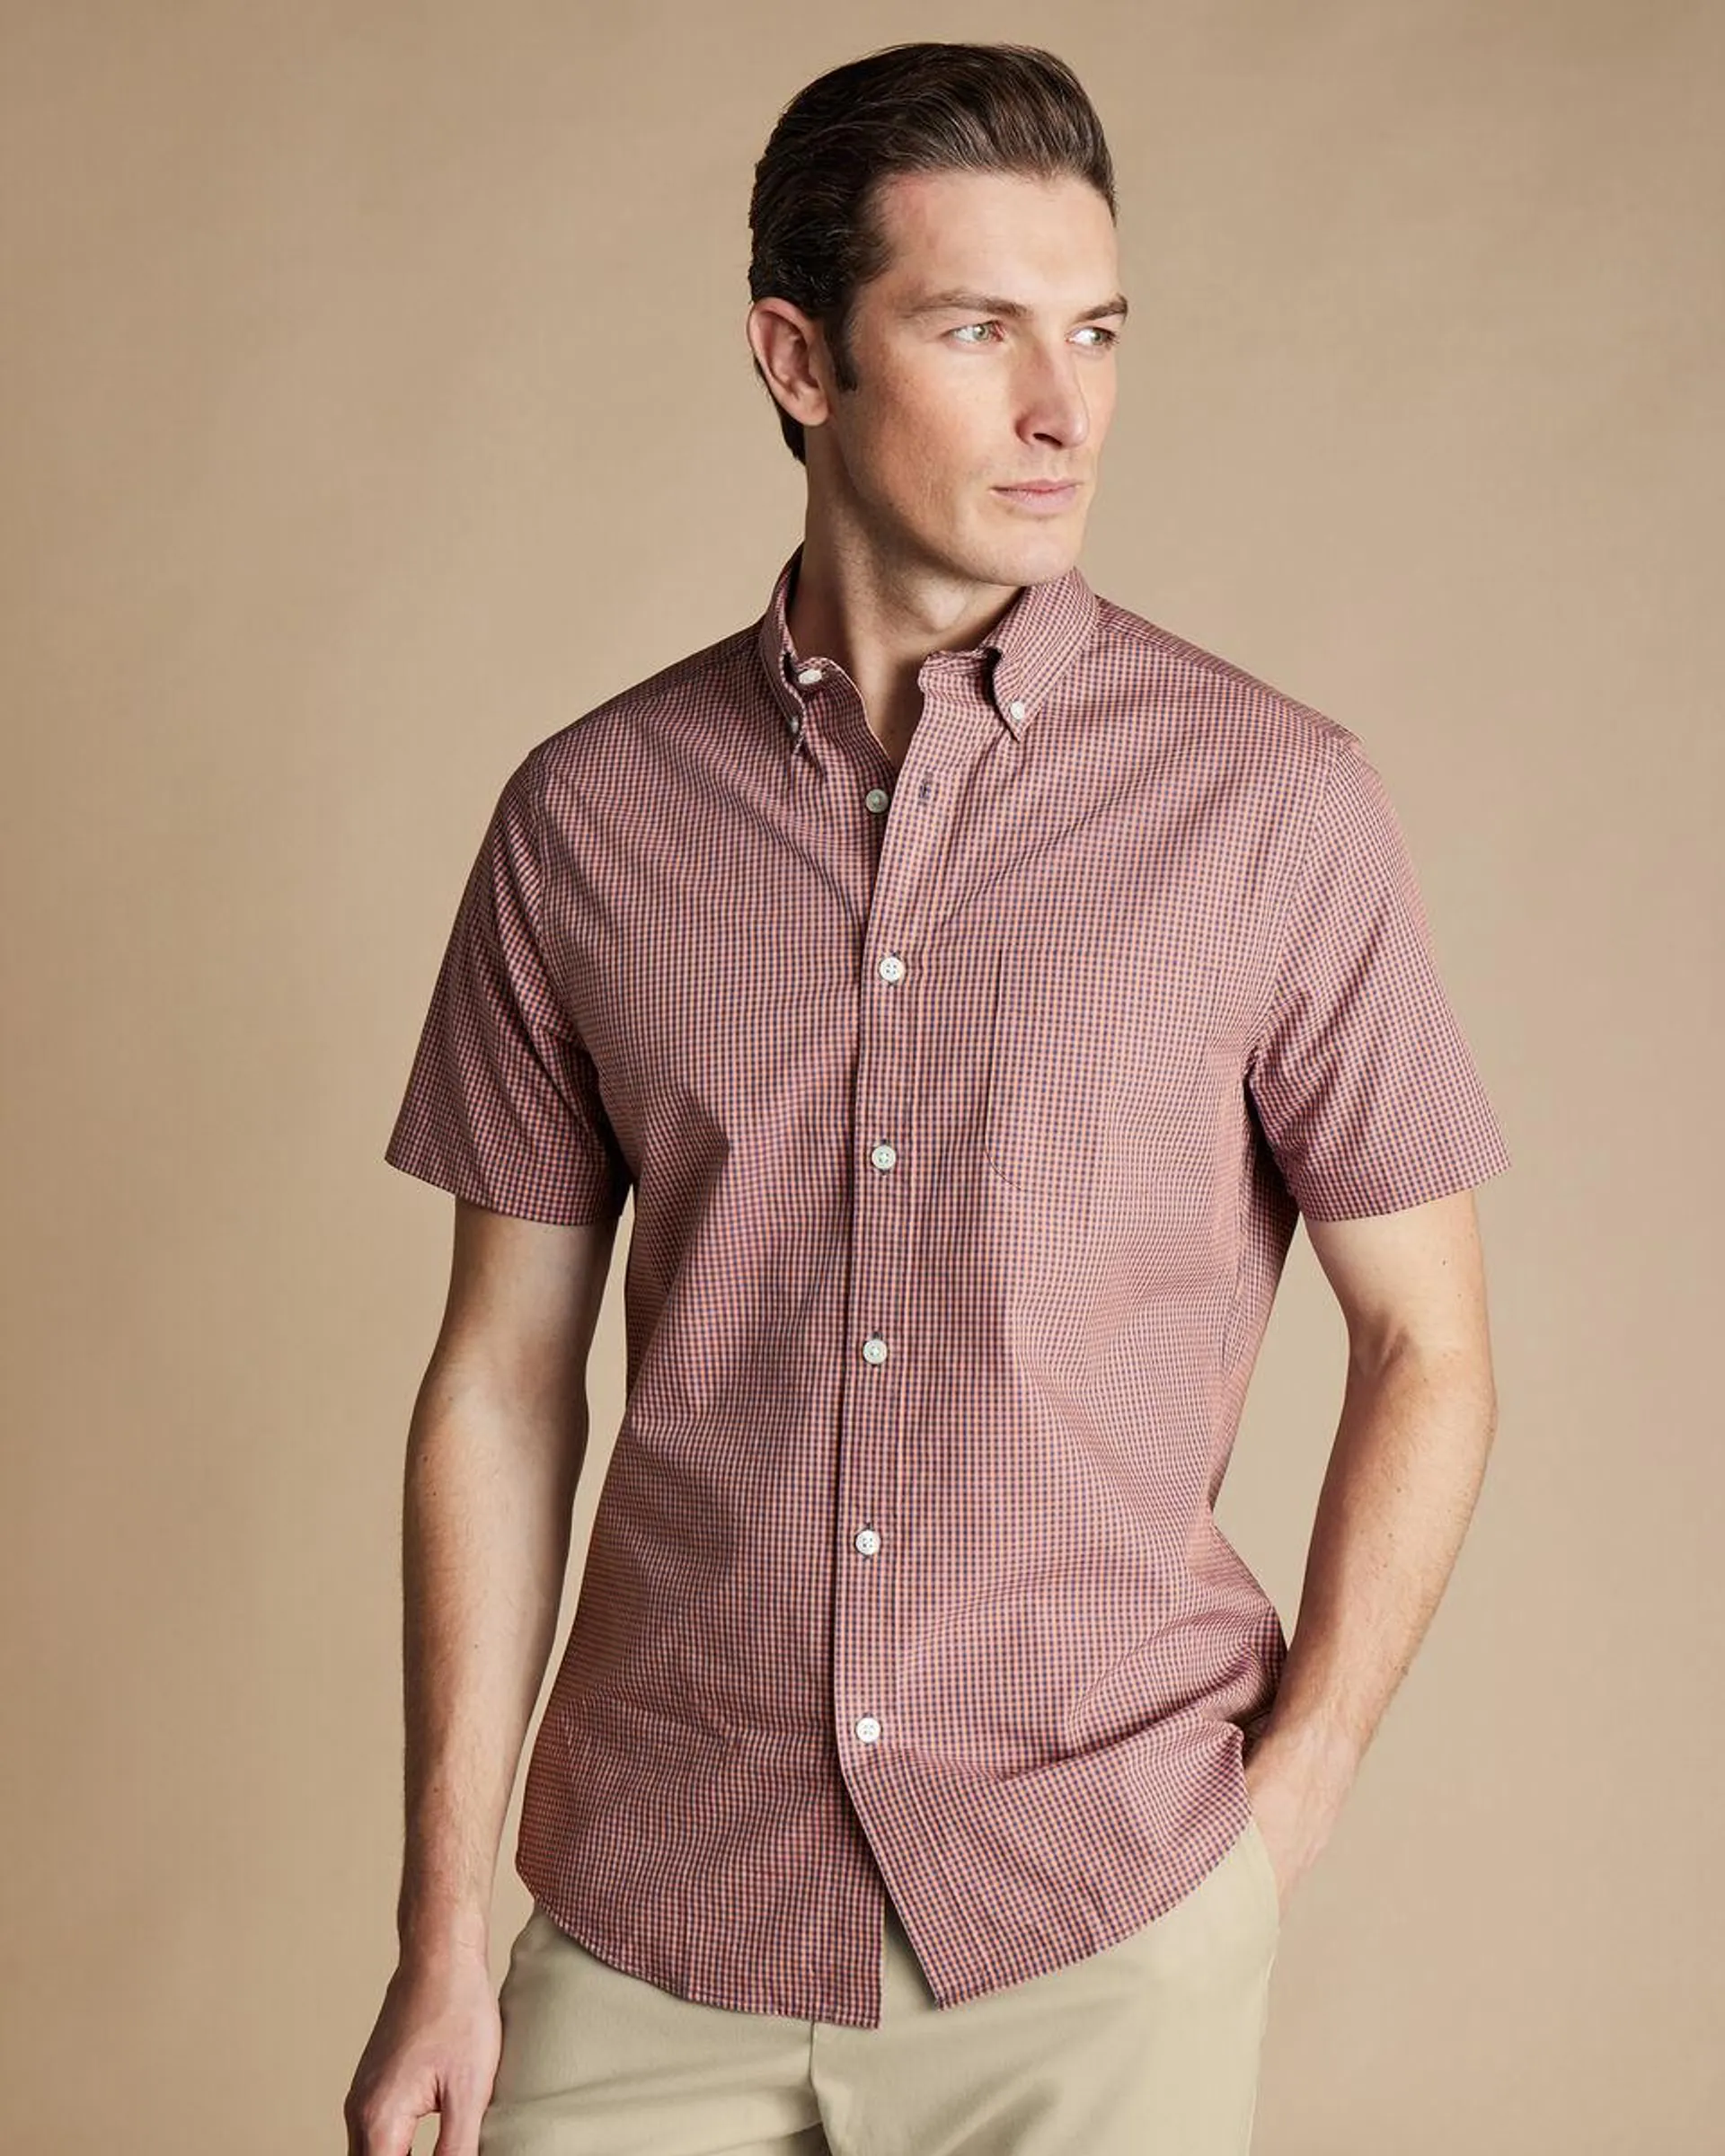 details about product: Button-Down Collar Non-Iron Stretch Poplin Mini Gingham Short Sleeve Shirt - Light Coral Pink